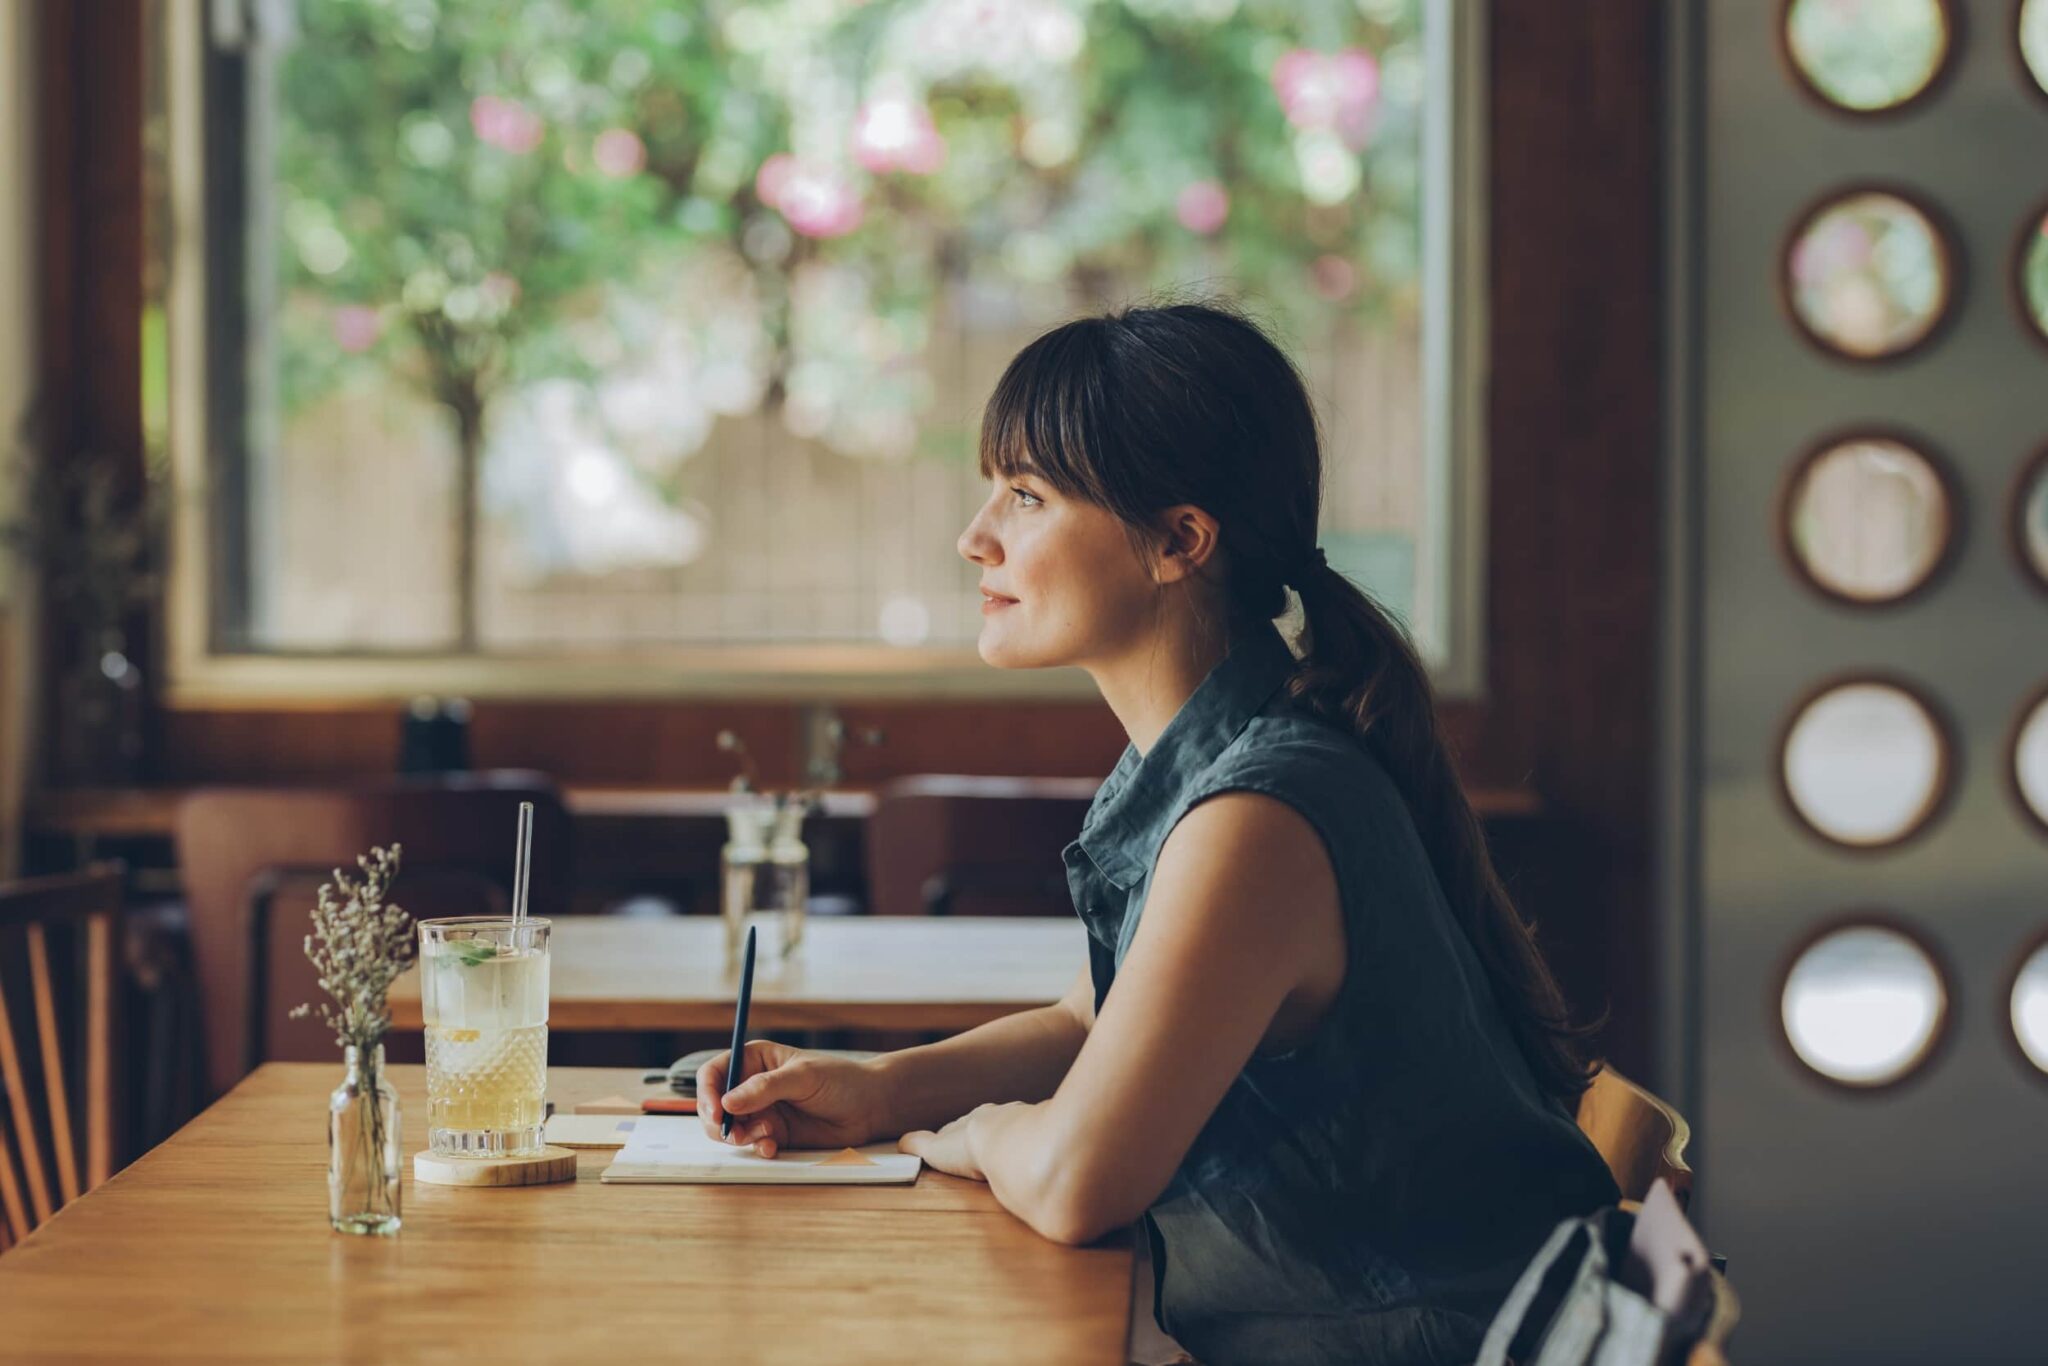 Smiling woman sitting at table